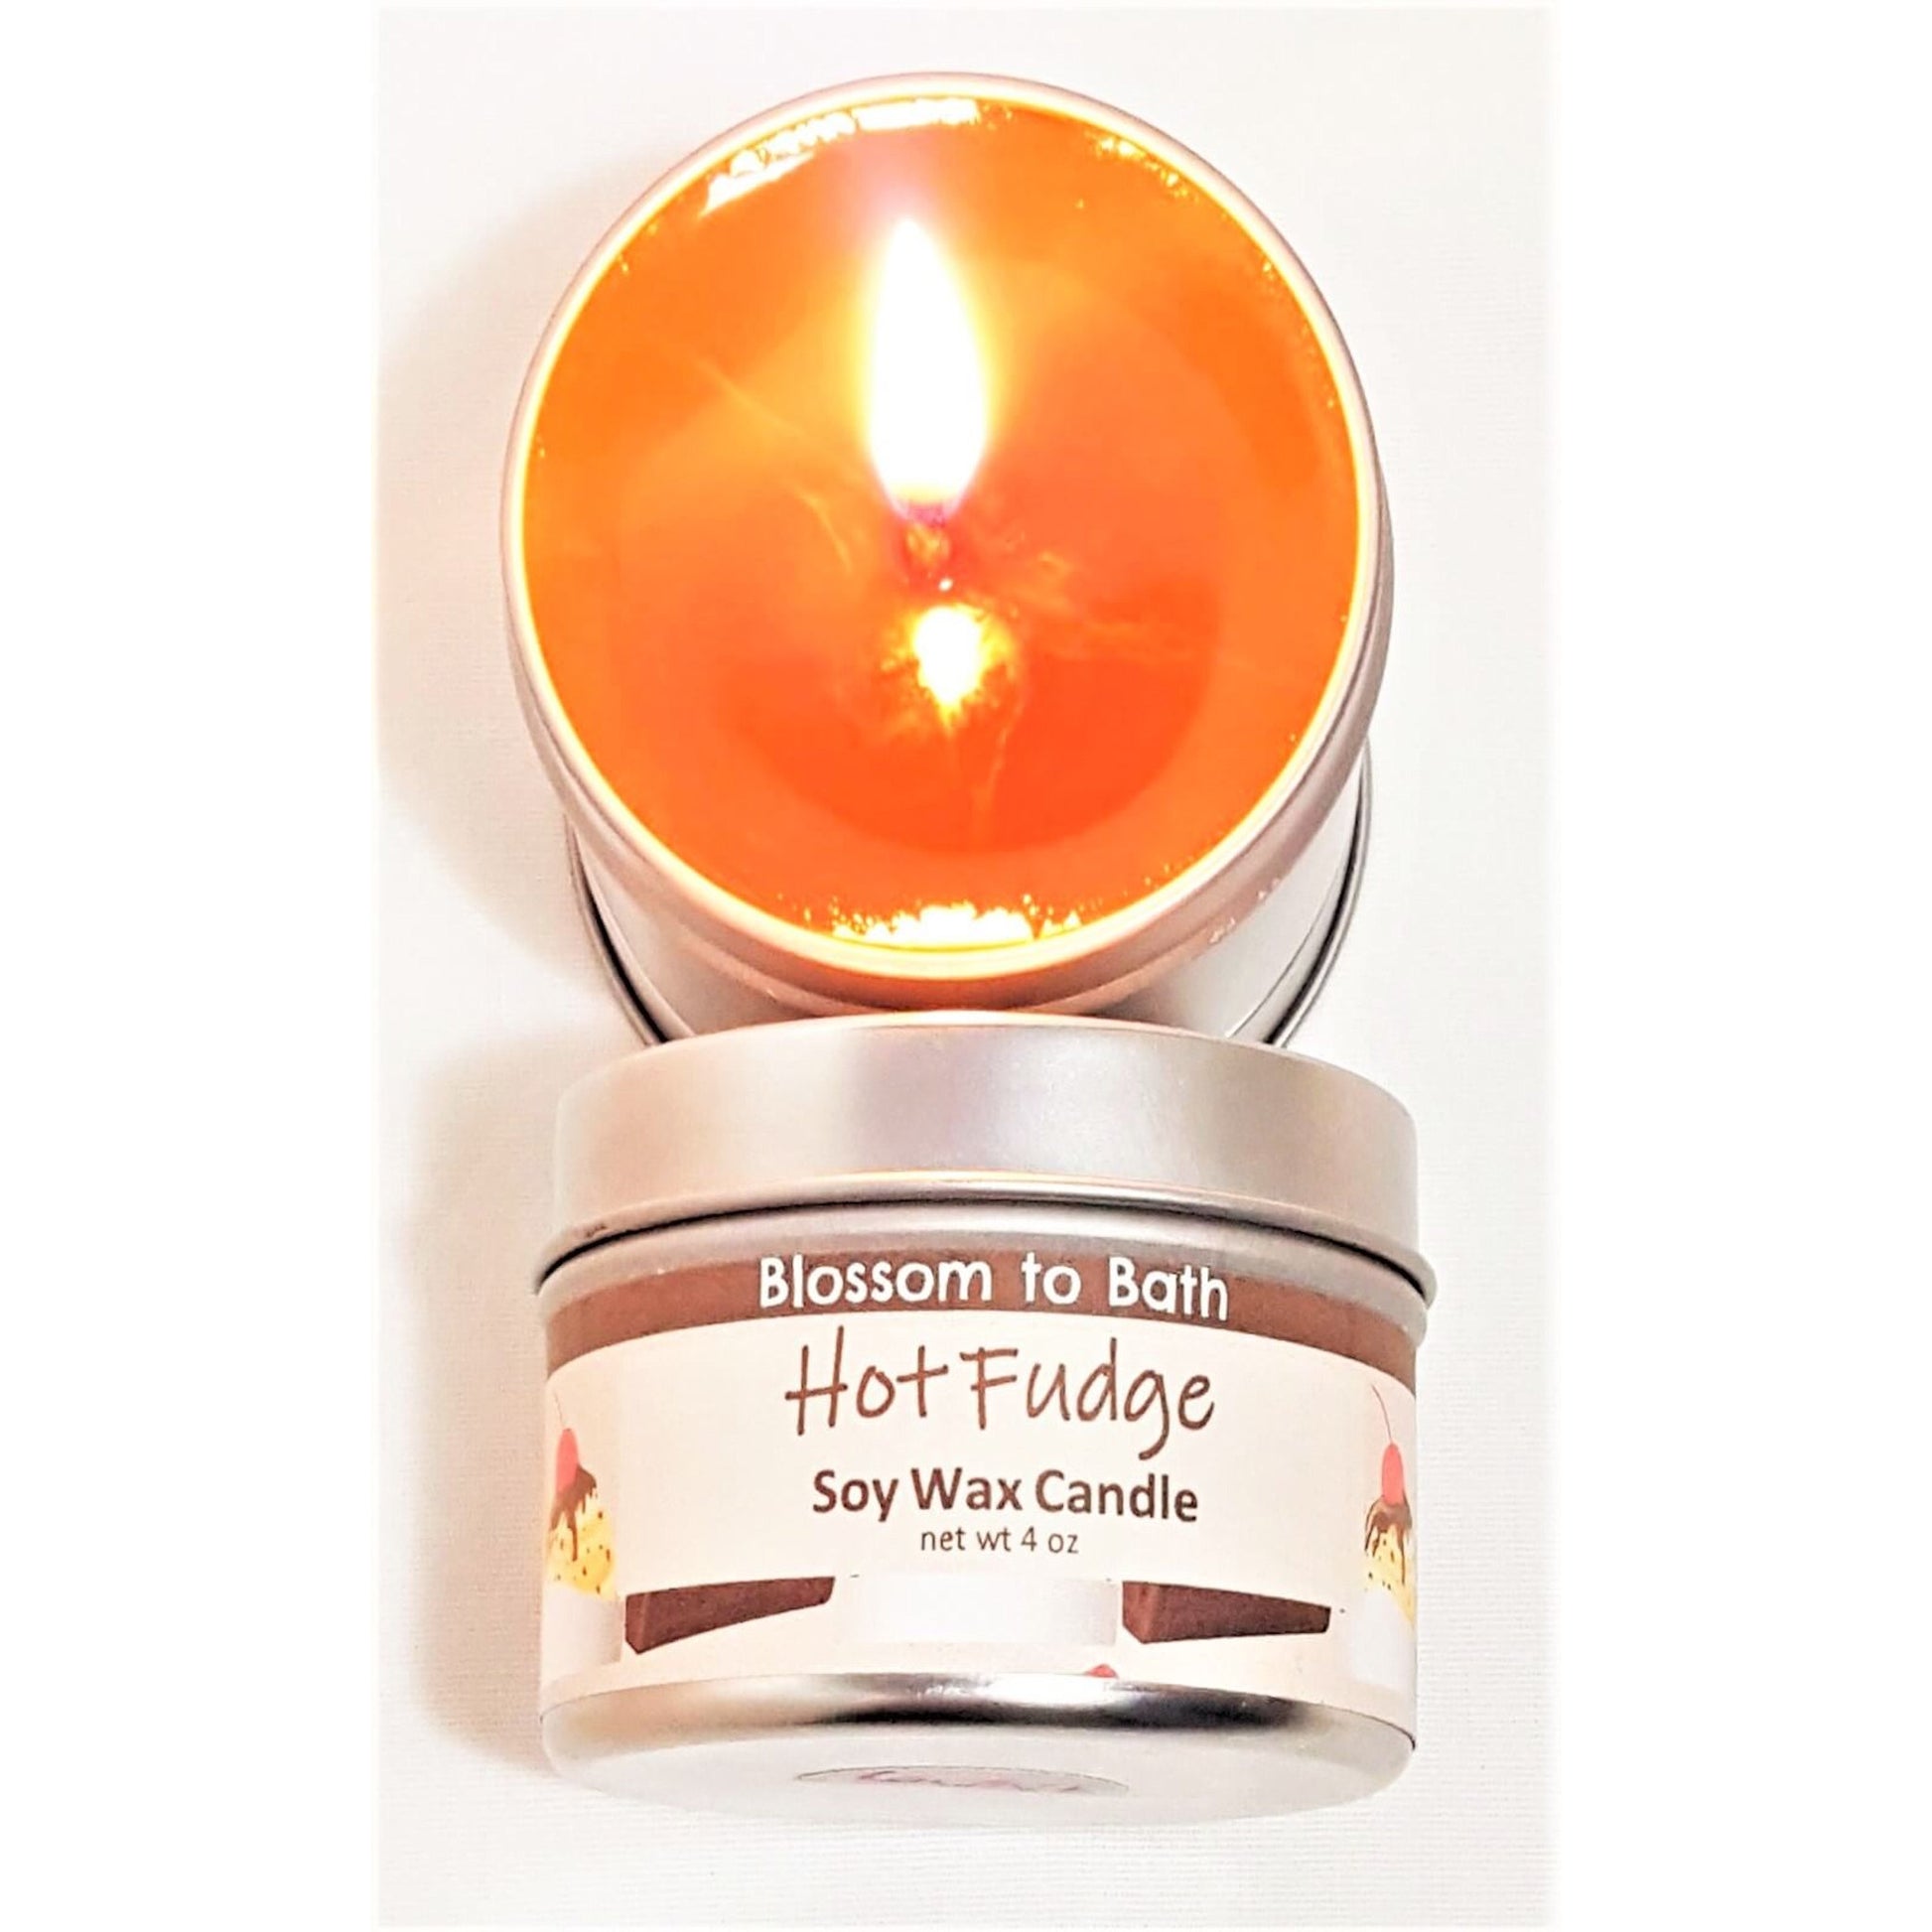 Buy Blossom to Bath Hot Fudge Soy Wax Candle from Flowersong Soap Studio.  Fill the air with a charming fragrance that lasts for hours  The fragrance is three layers deep in rich chocolate.